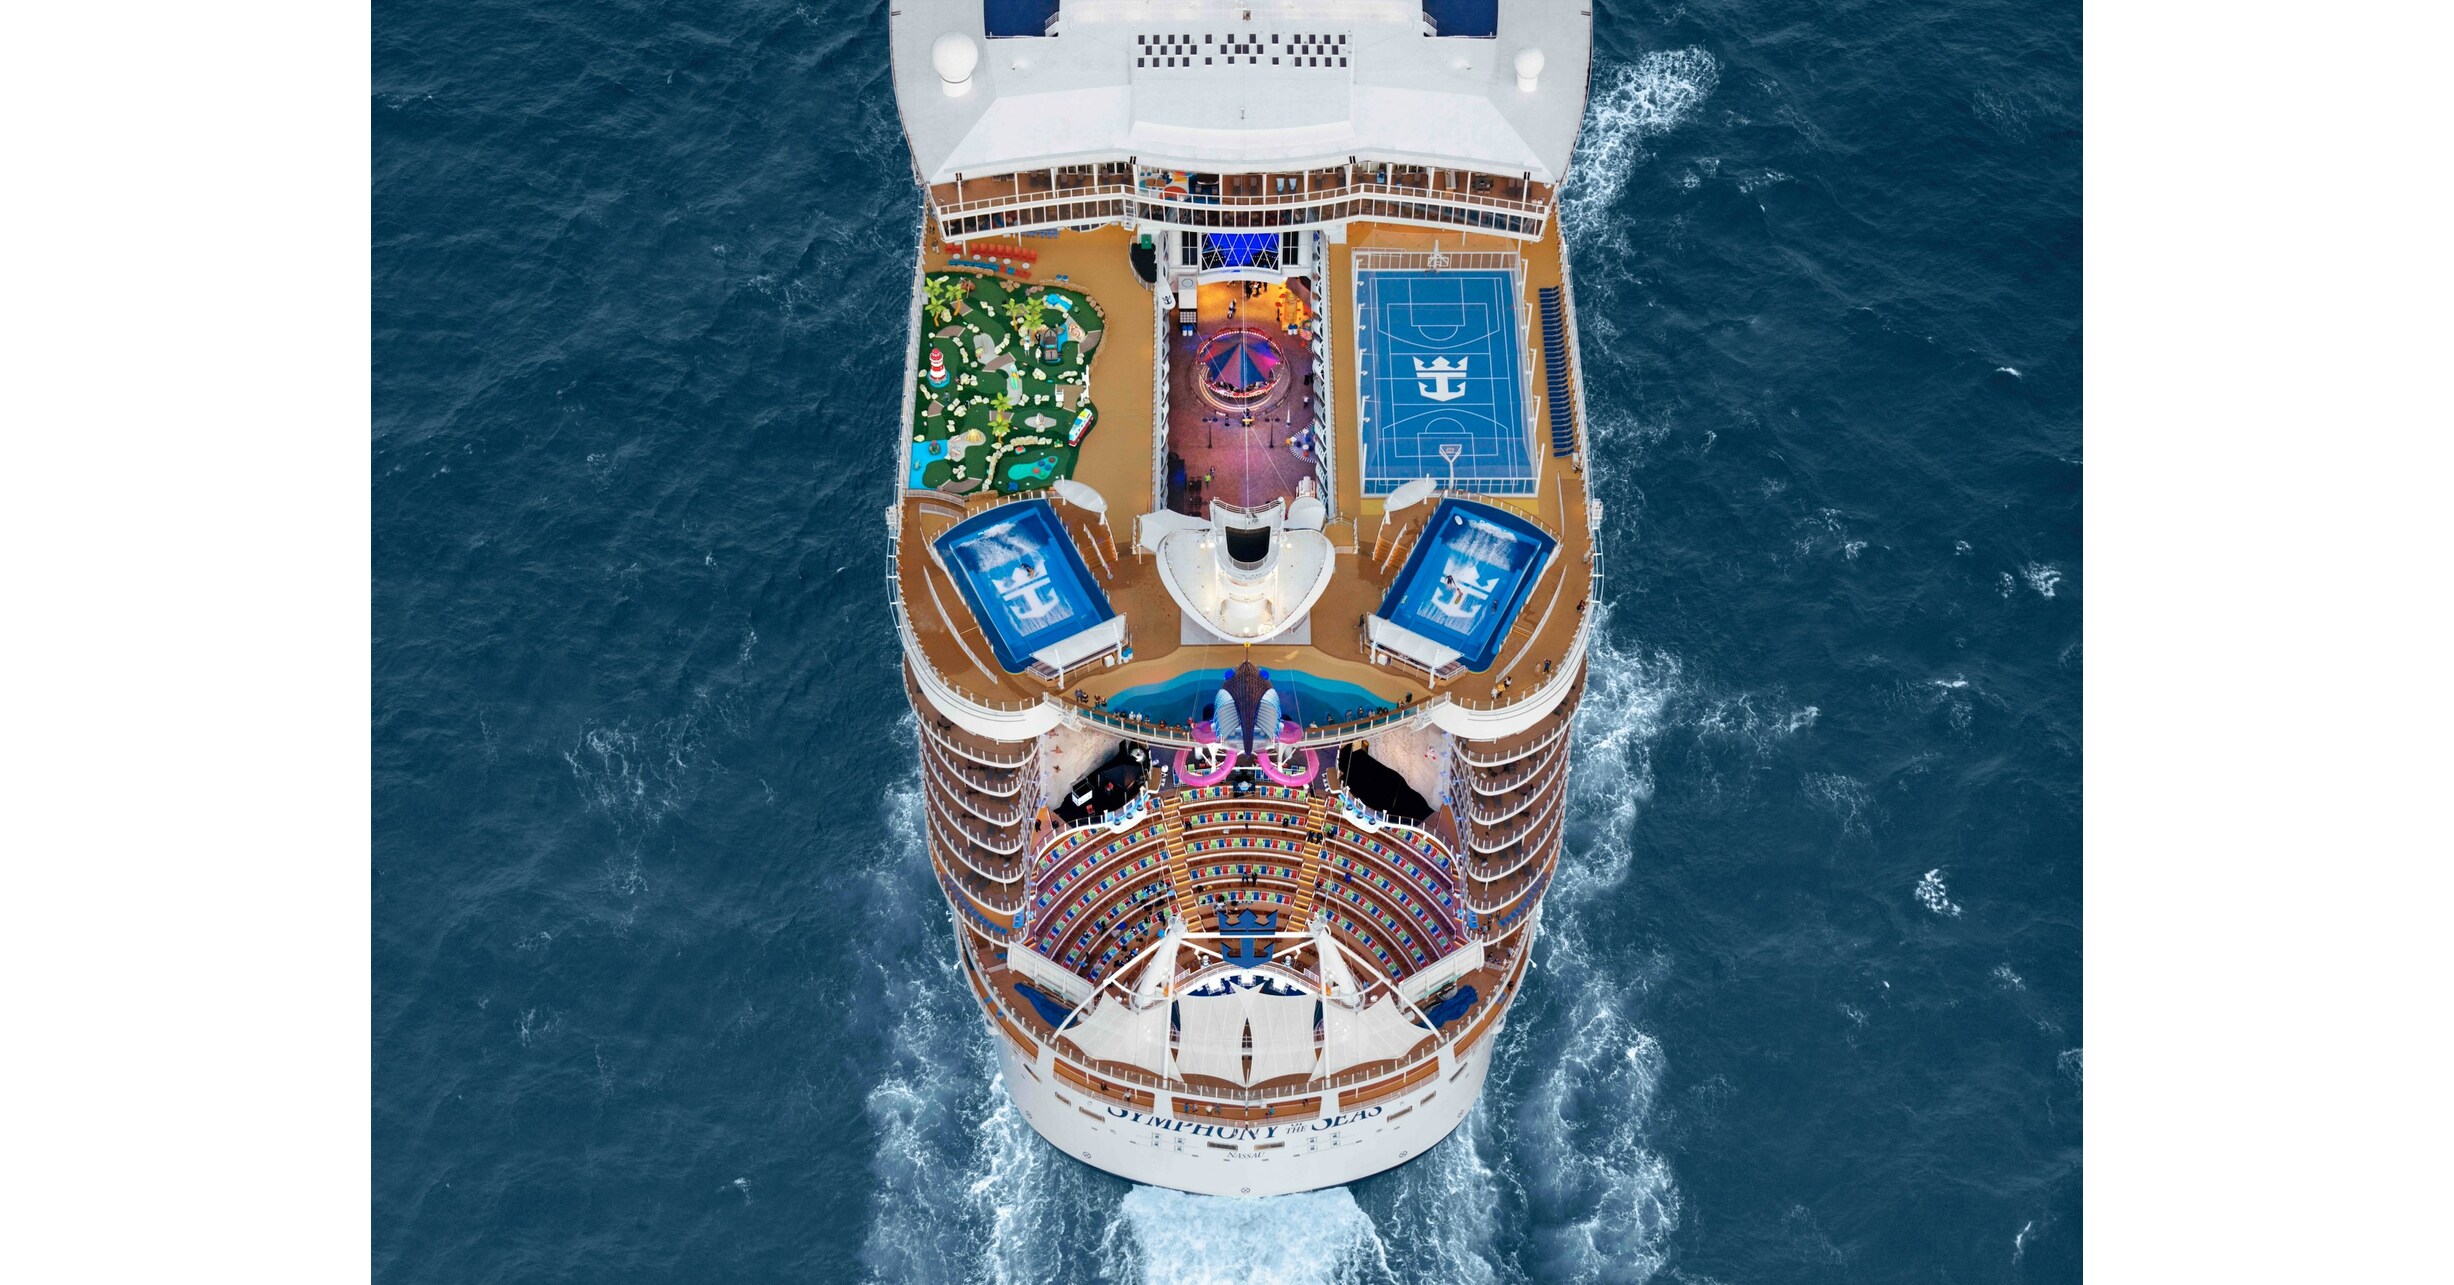 Oasis is reality as Royal Caribbean announces 'one-of-a-kind